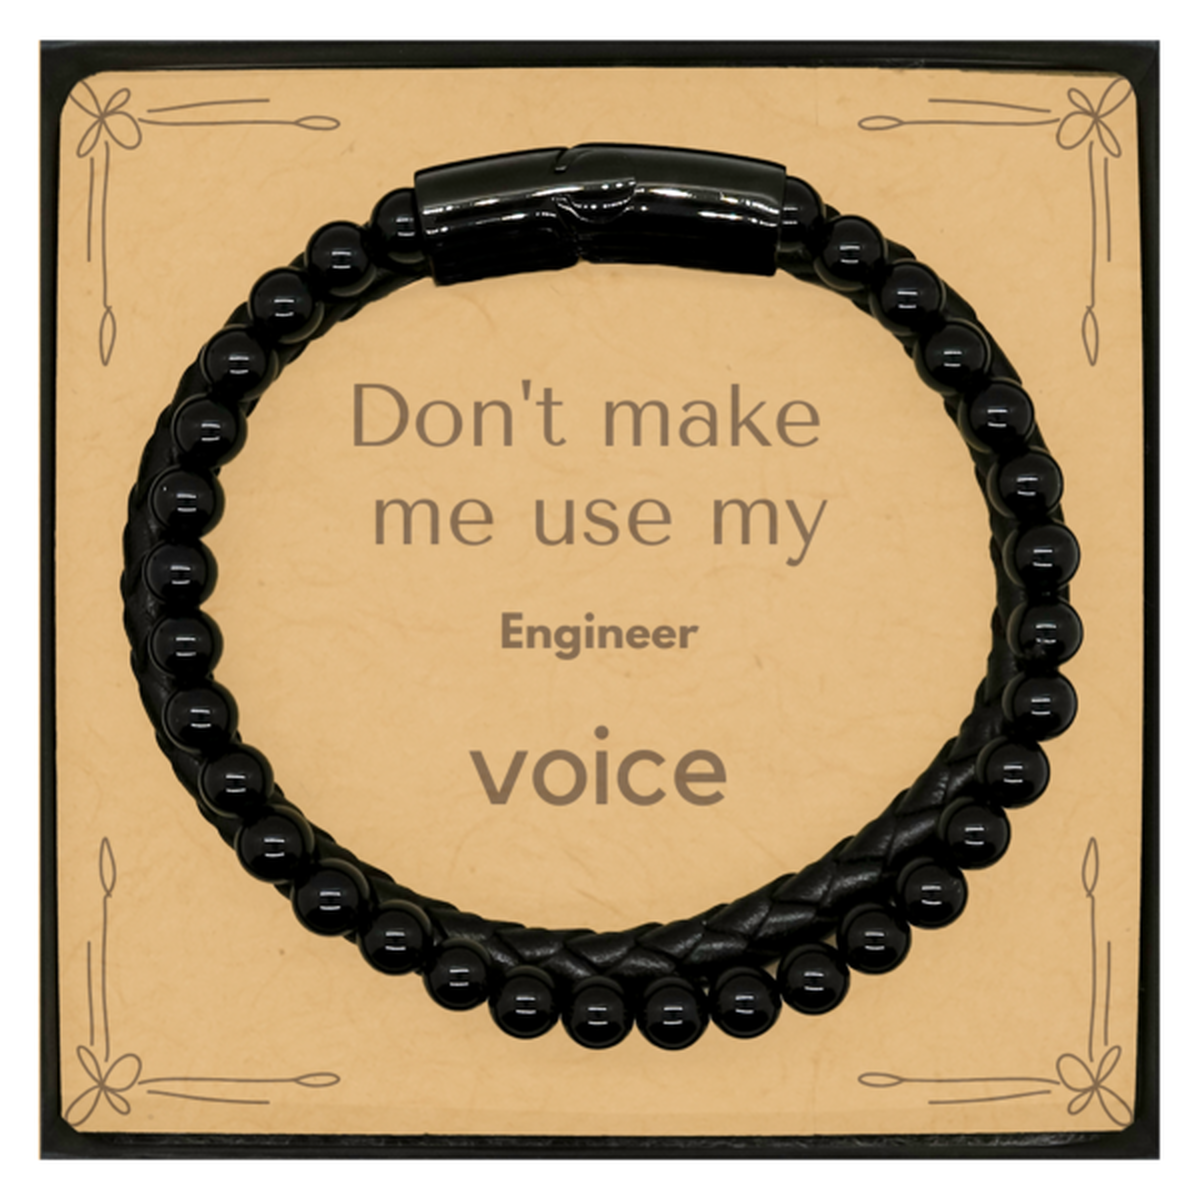 Don't make me use my Engineer voice, Sarcasm Engineer Card Gifts, Christmas Engineer Stone Leather Bracelets Birthday Unique Gifts For Engineer Coworkers, Men, Women, Colleague, Friends